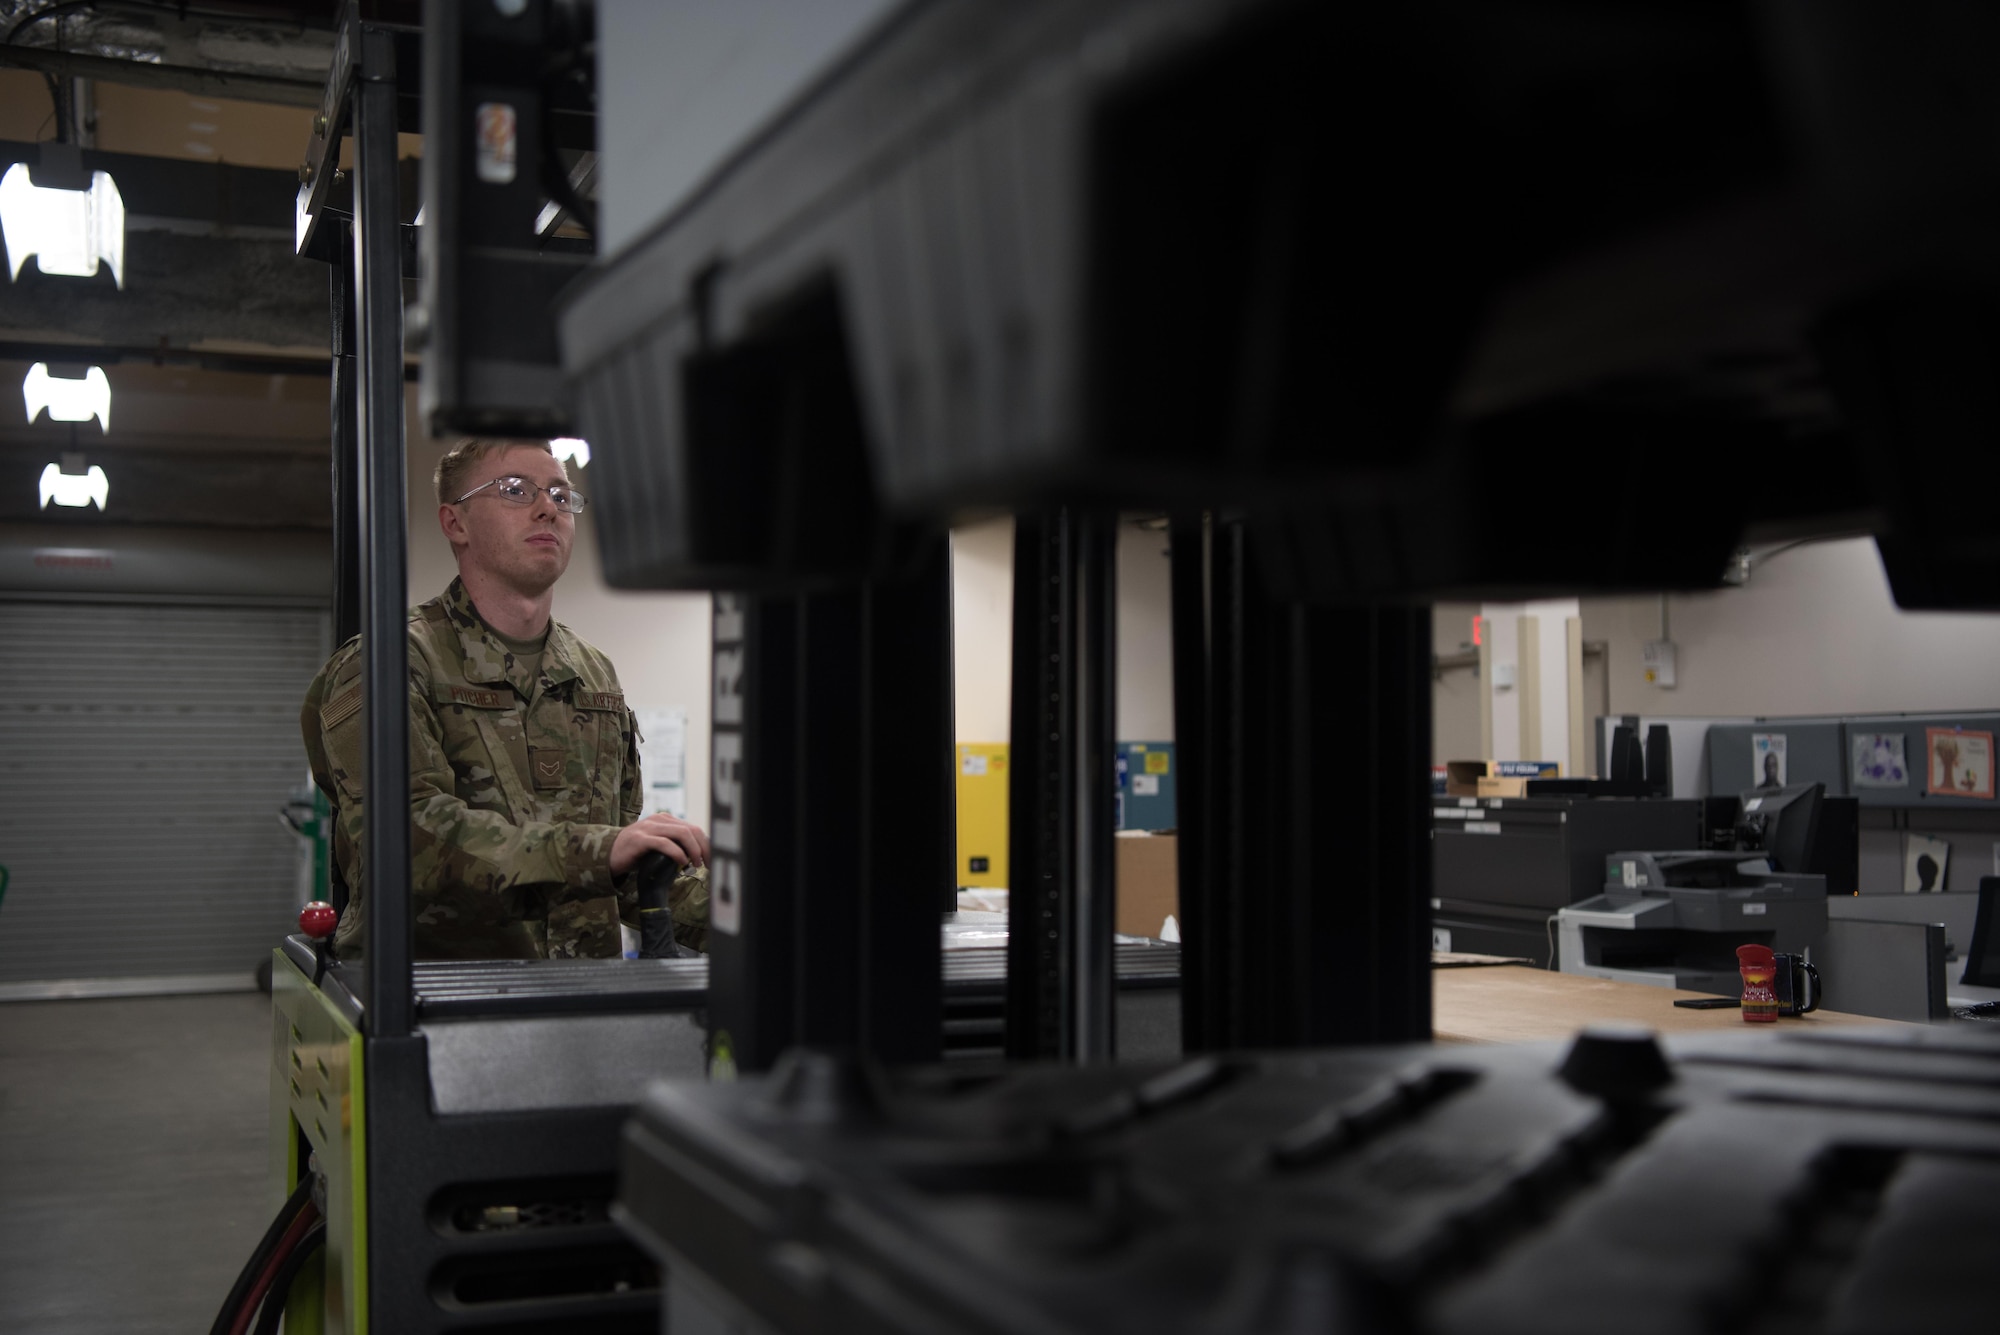 Airman 1st Class Bailey Pitcher, 22nd Medical Support Squadron acquisitions technician, uses a forklift to organize war reserve material July 15, 2020, at McConnell Air Force Base, Kansas. The Medical Logistics Flight prepares war reserve materials that may deploy during a time of war to Airmen that need them. (U.S. Air Force photo by Senior Airman Alexi Bosarge)